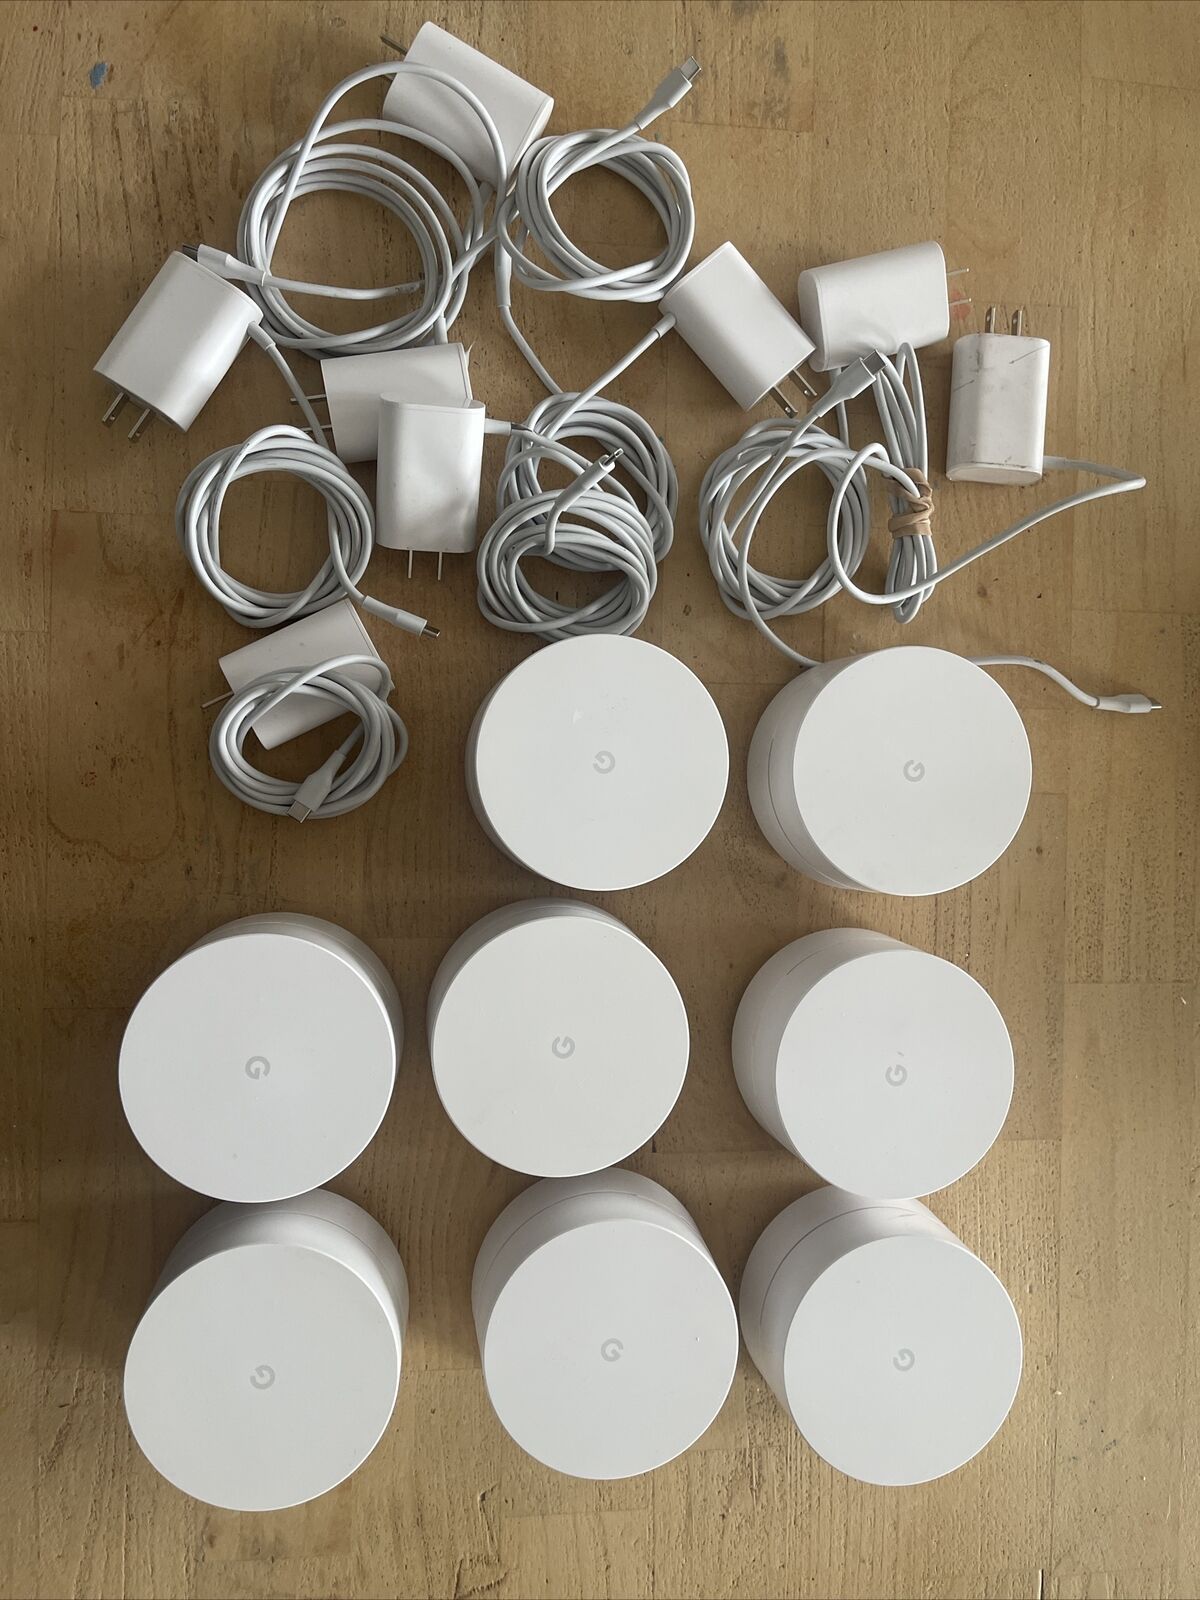 Lot of 8 AC-1304 Google WiFi Routers & One GJ2CQ Google WiFi Router